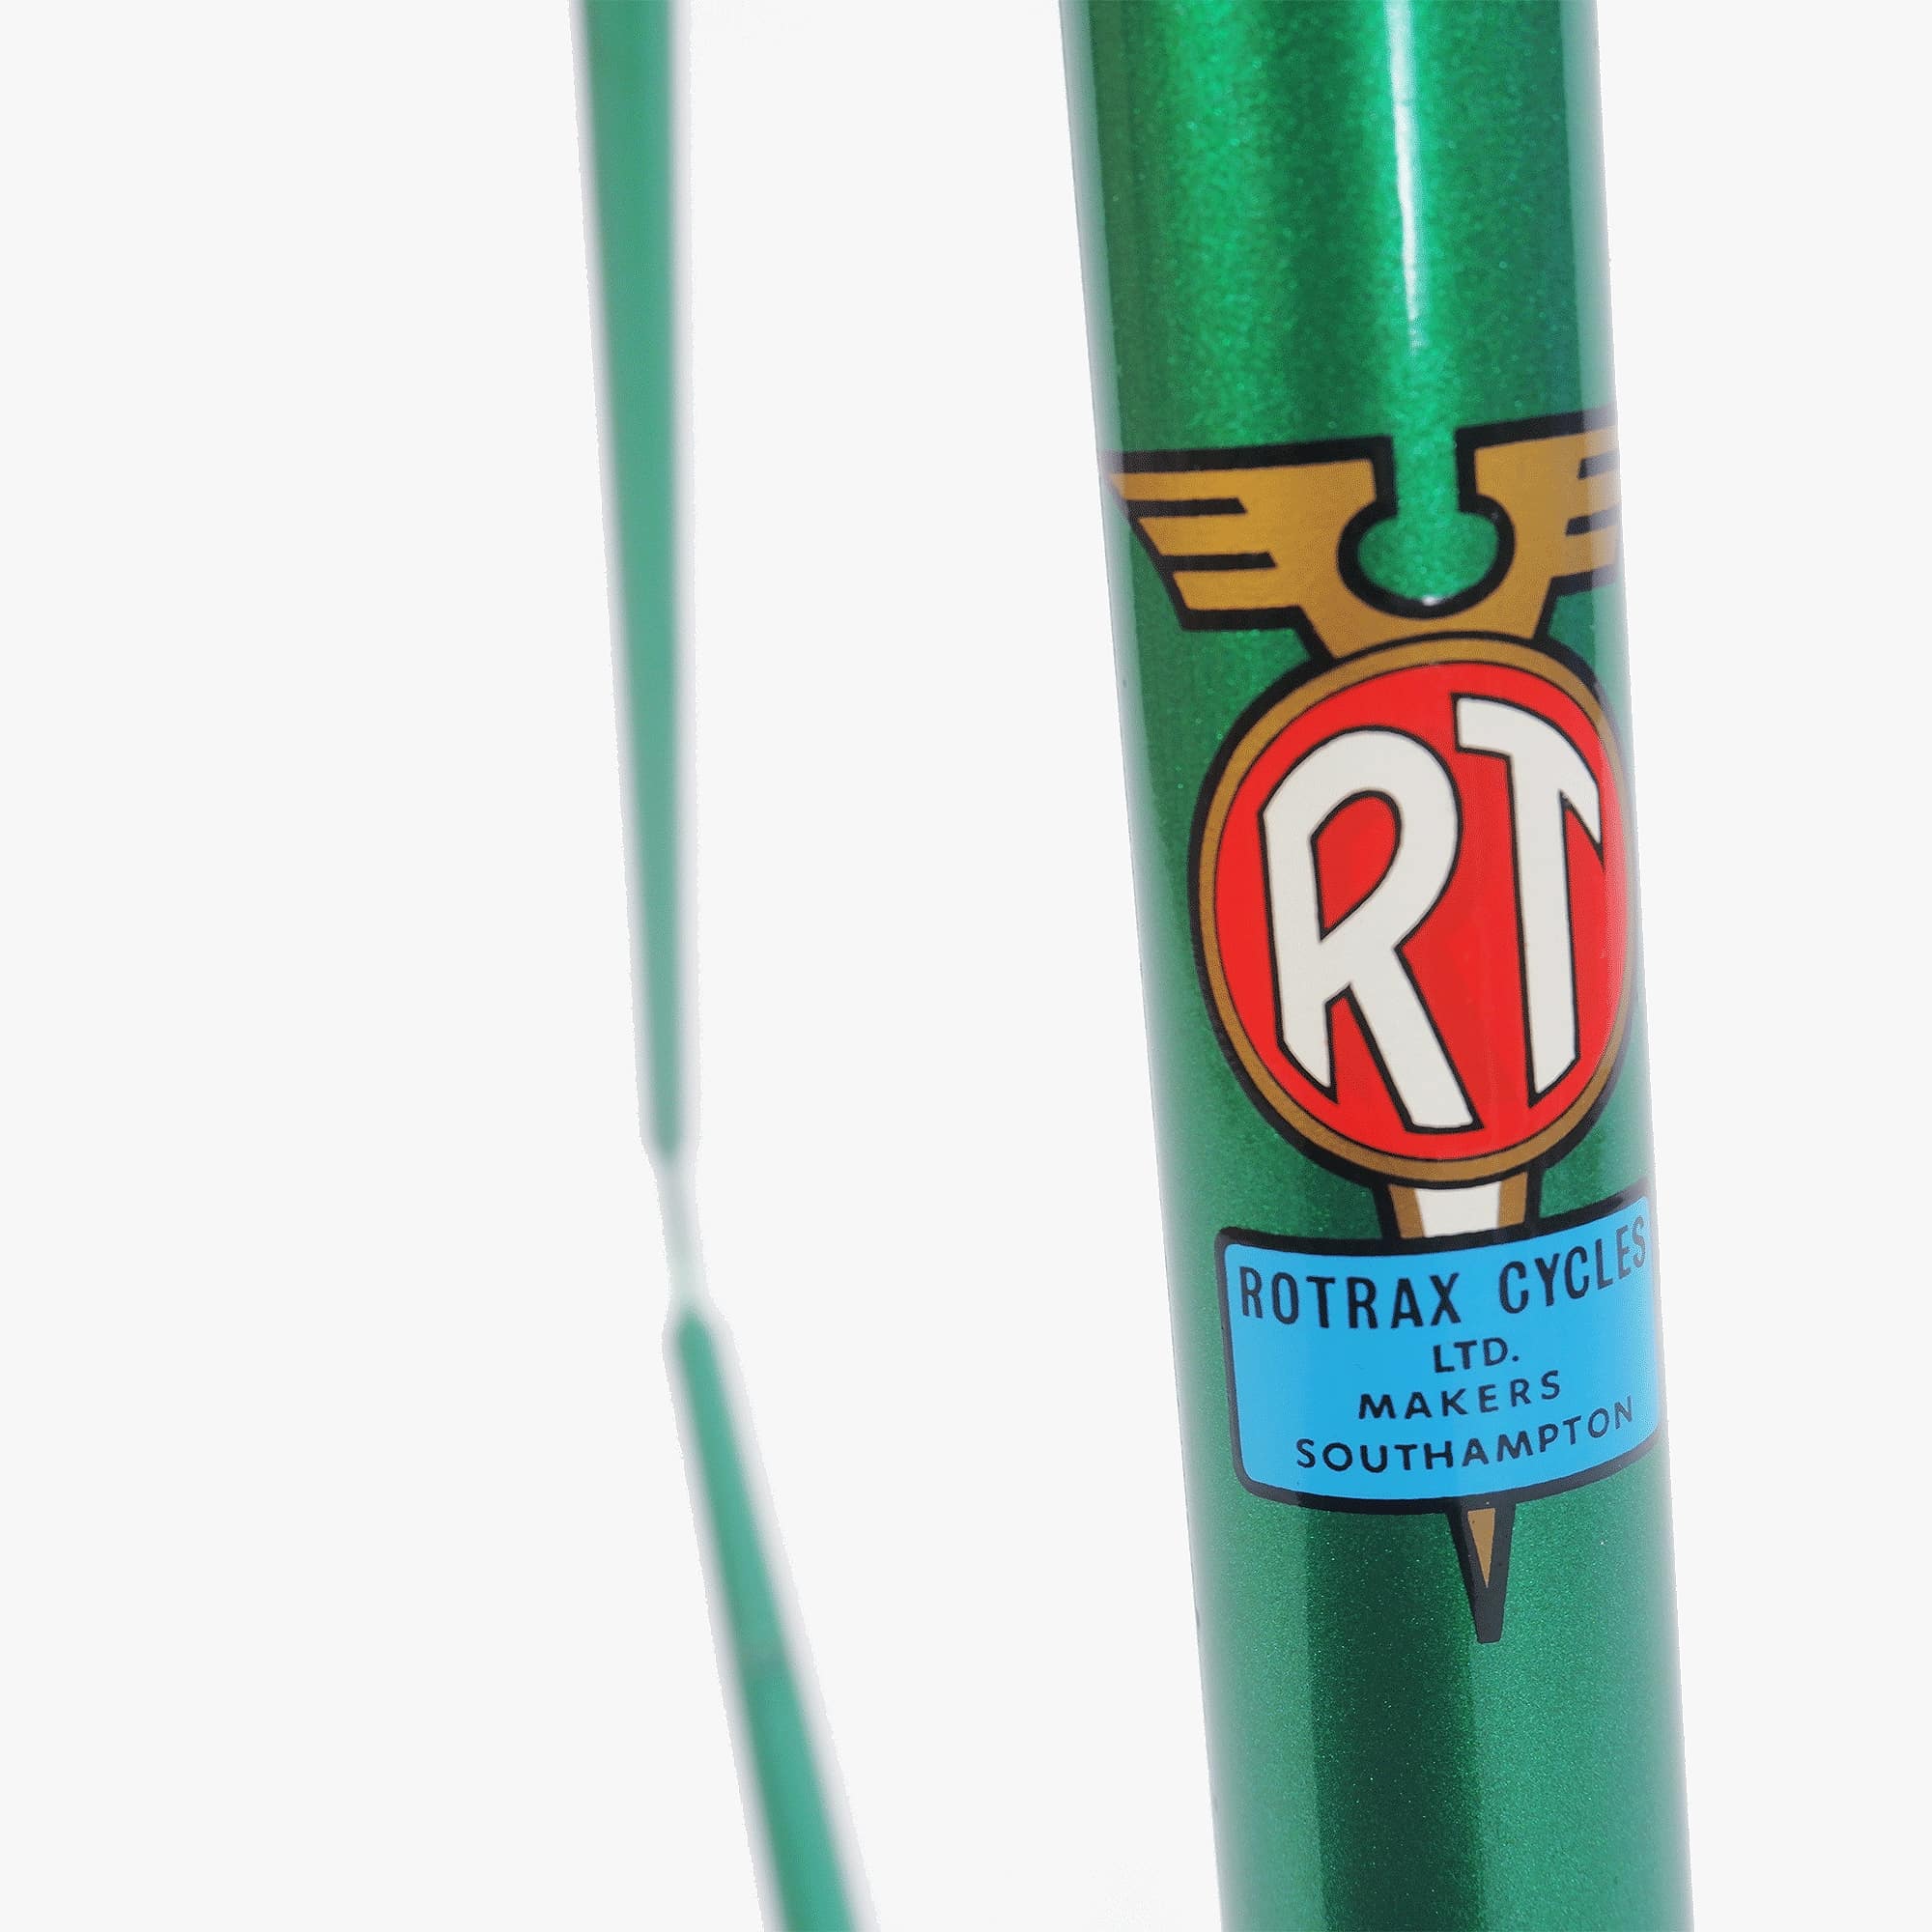 Rotrax green frame seat tube decal "Rotrax Cycles"